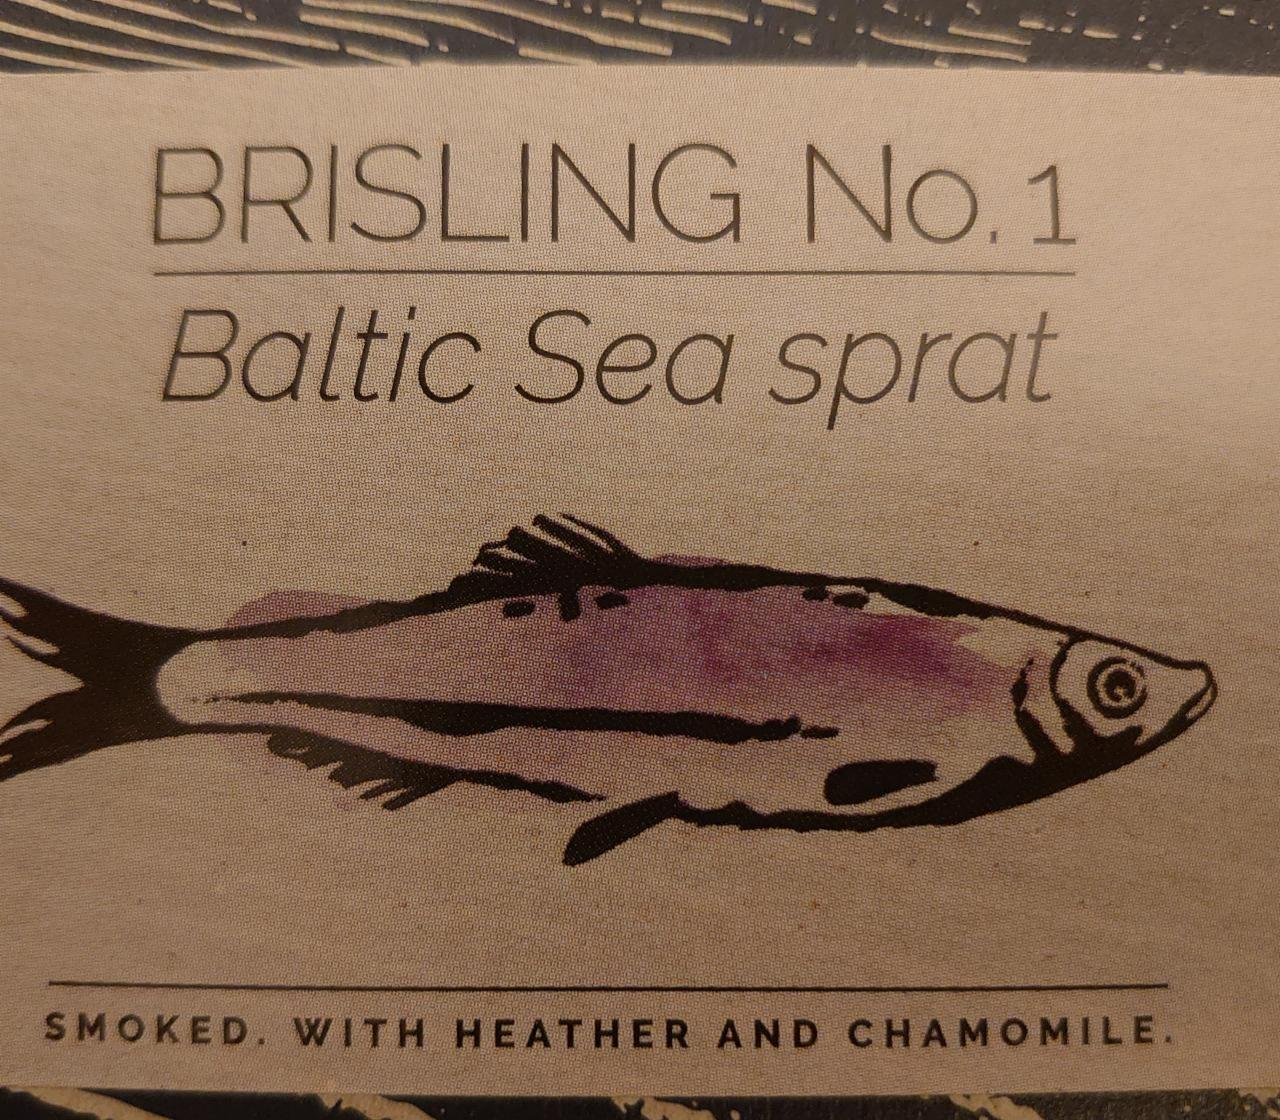 Fotografie - Baltic Sea sprat smoked woth heather and chamomile Brisling No. 1